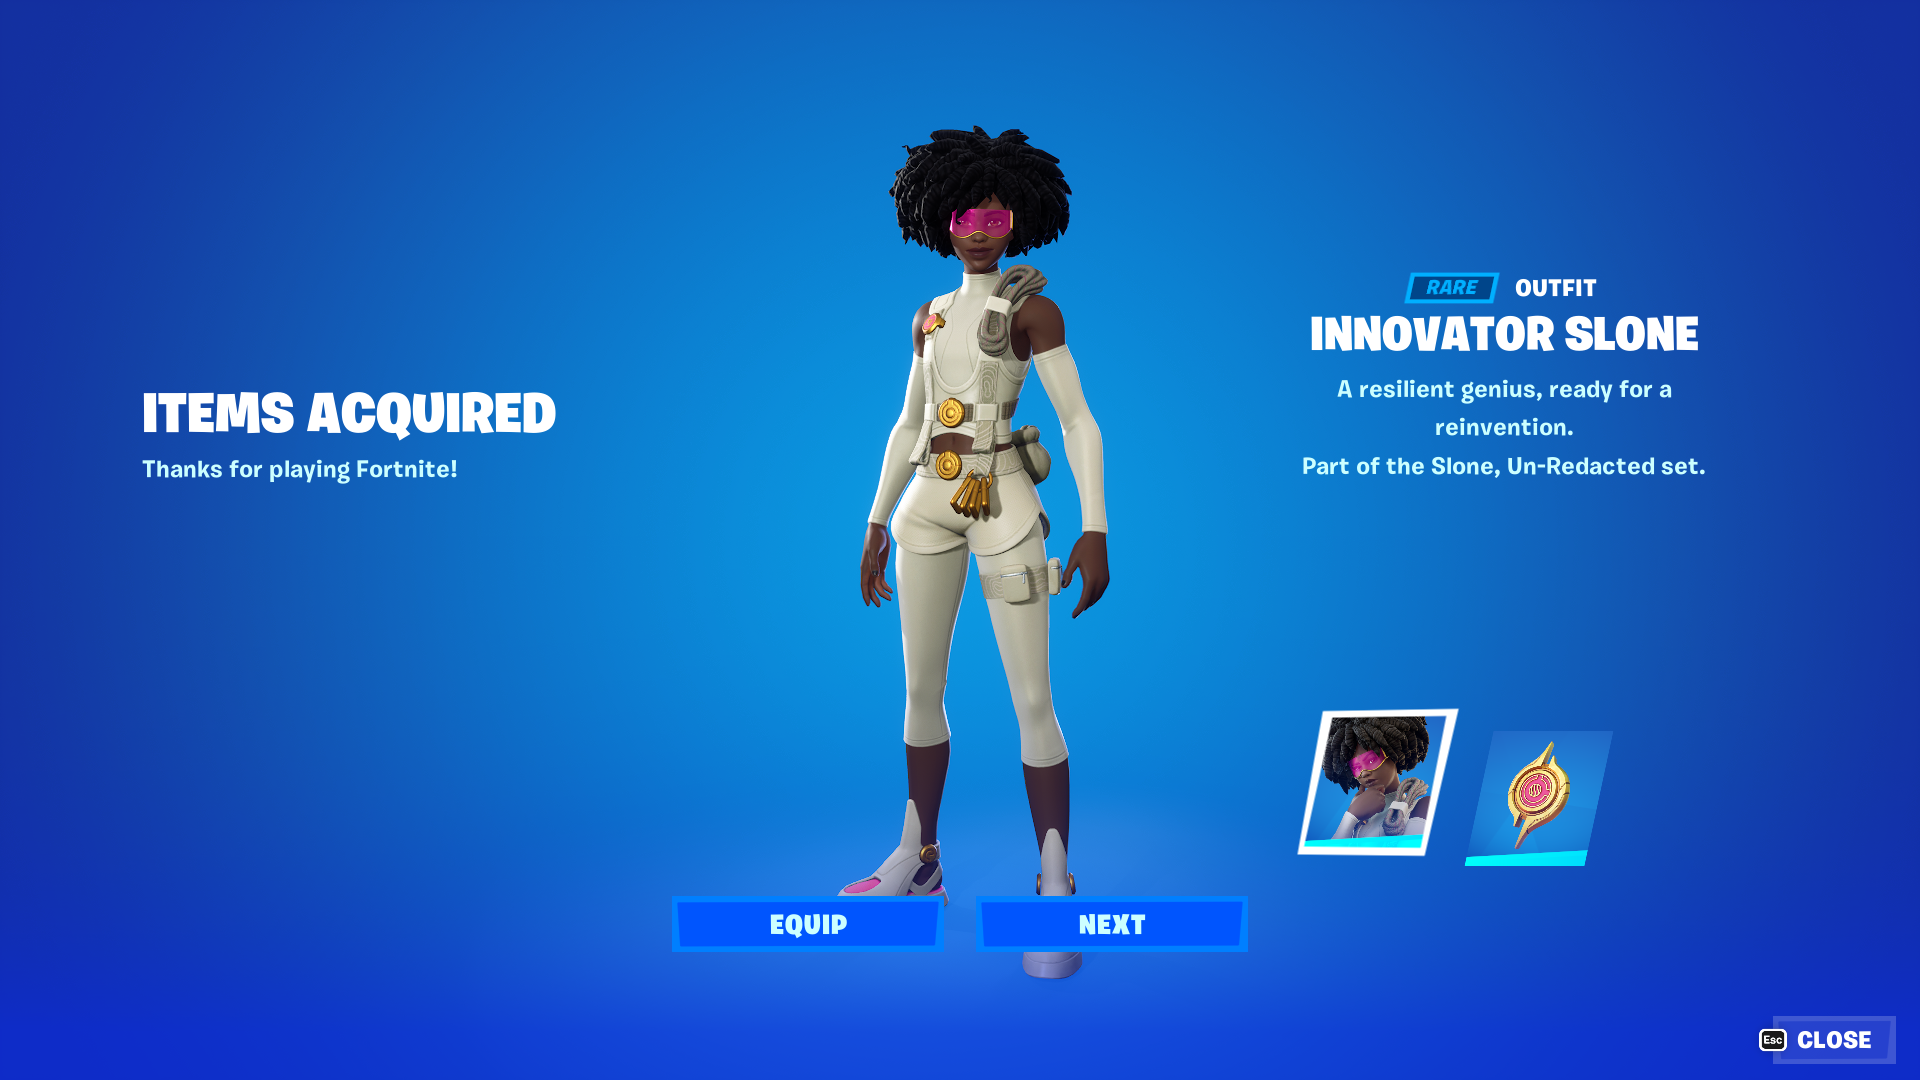 New Innovator Slone Outfit Available Now